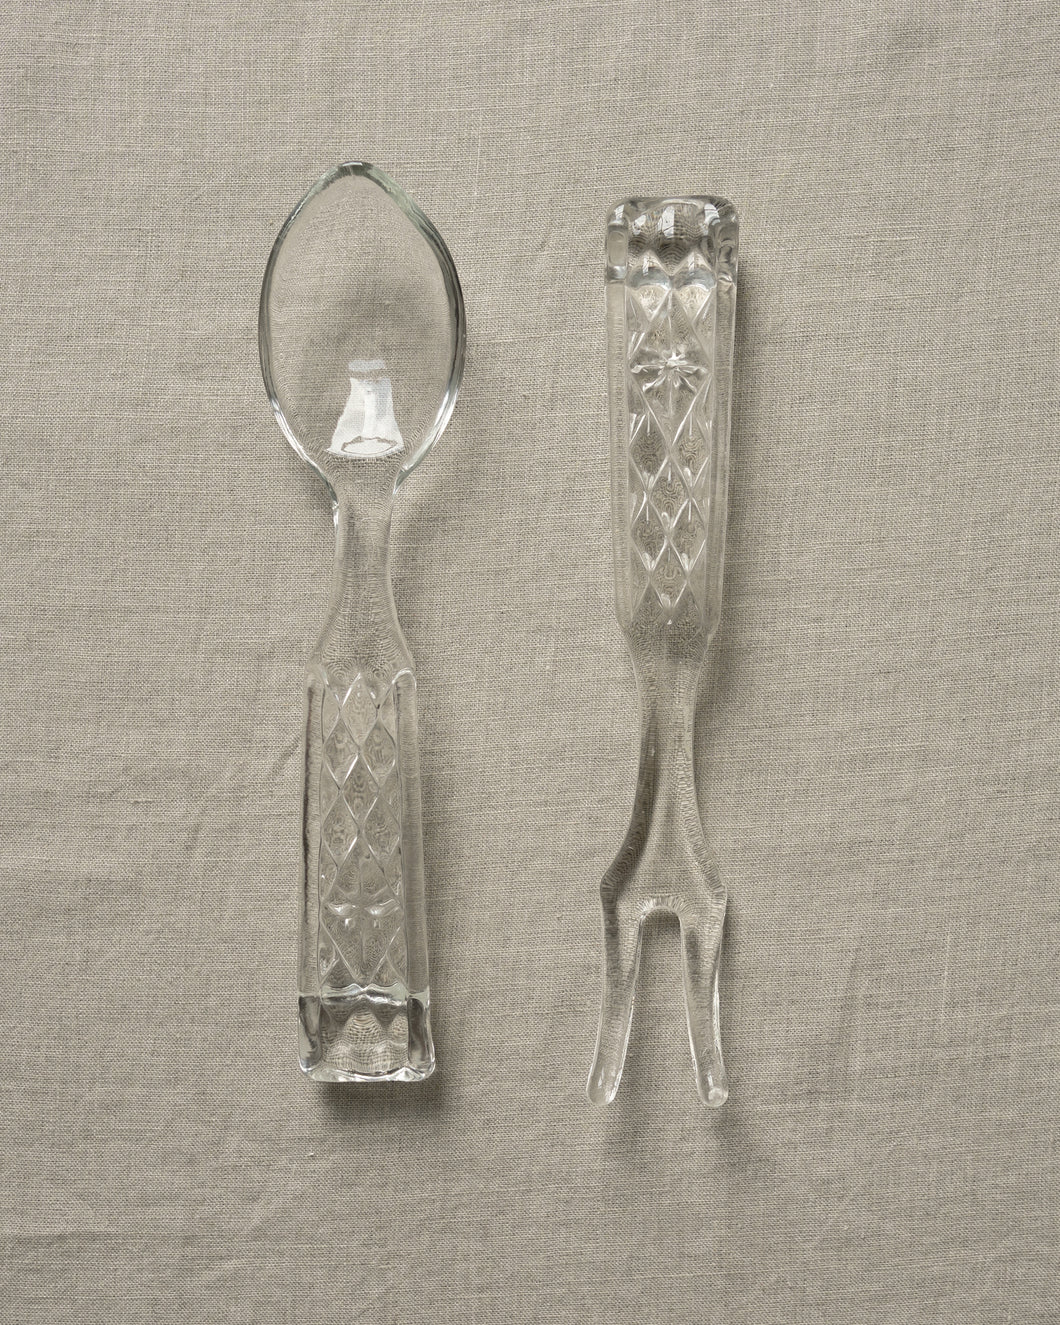 Wexford Glass Serving Set